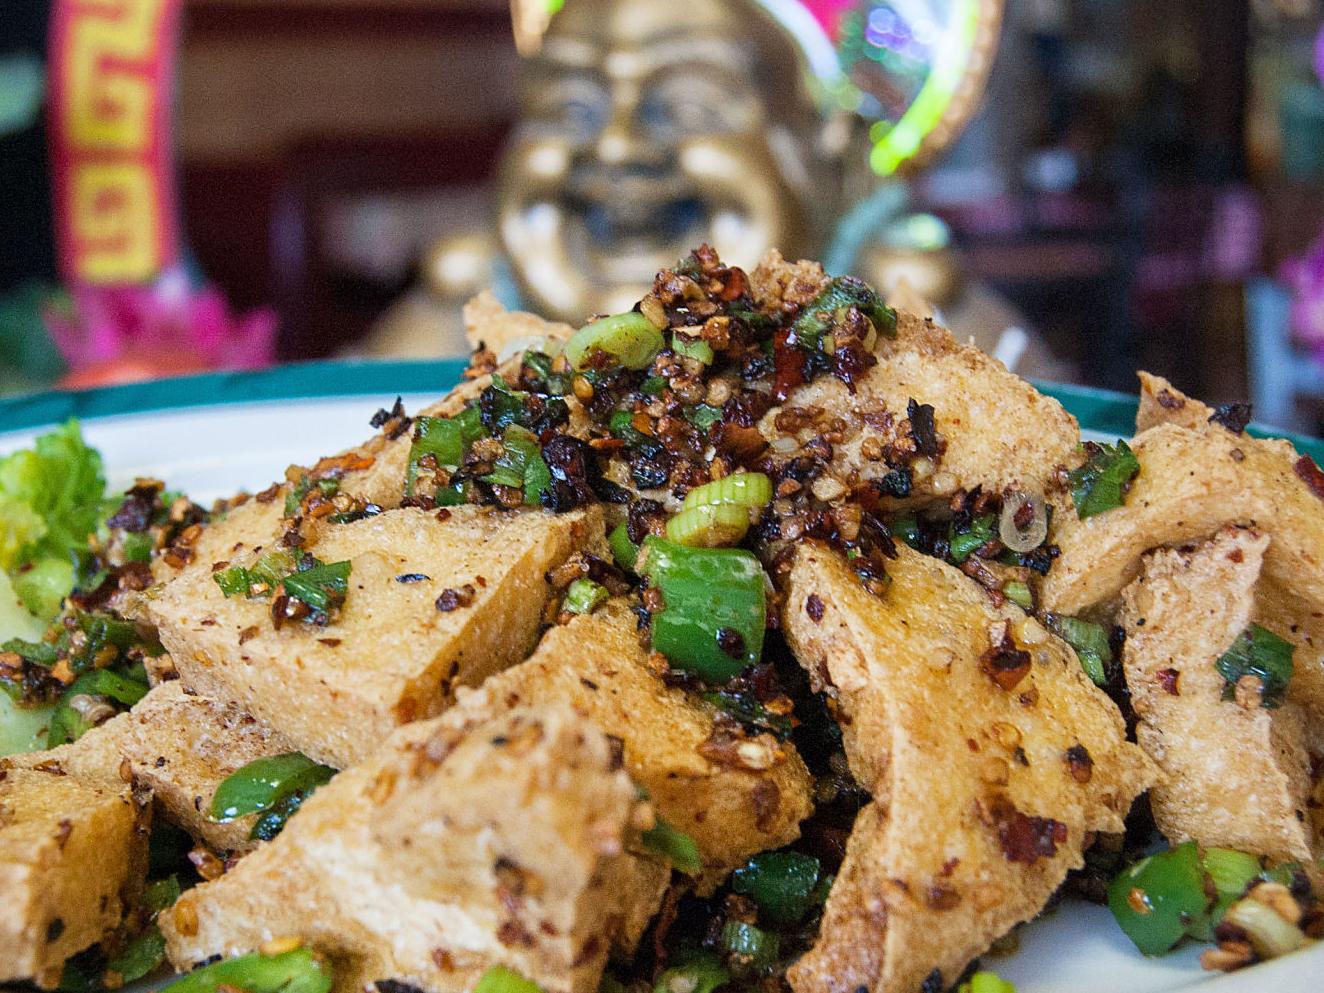 Tucson S Best Chinese Restaurants According To Local Chefs And